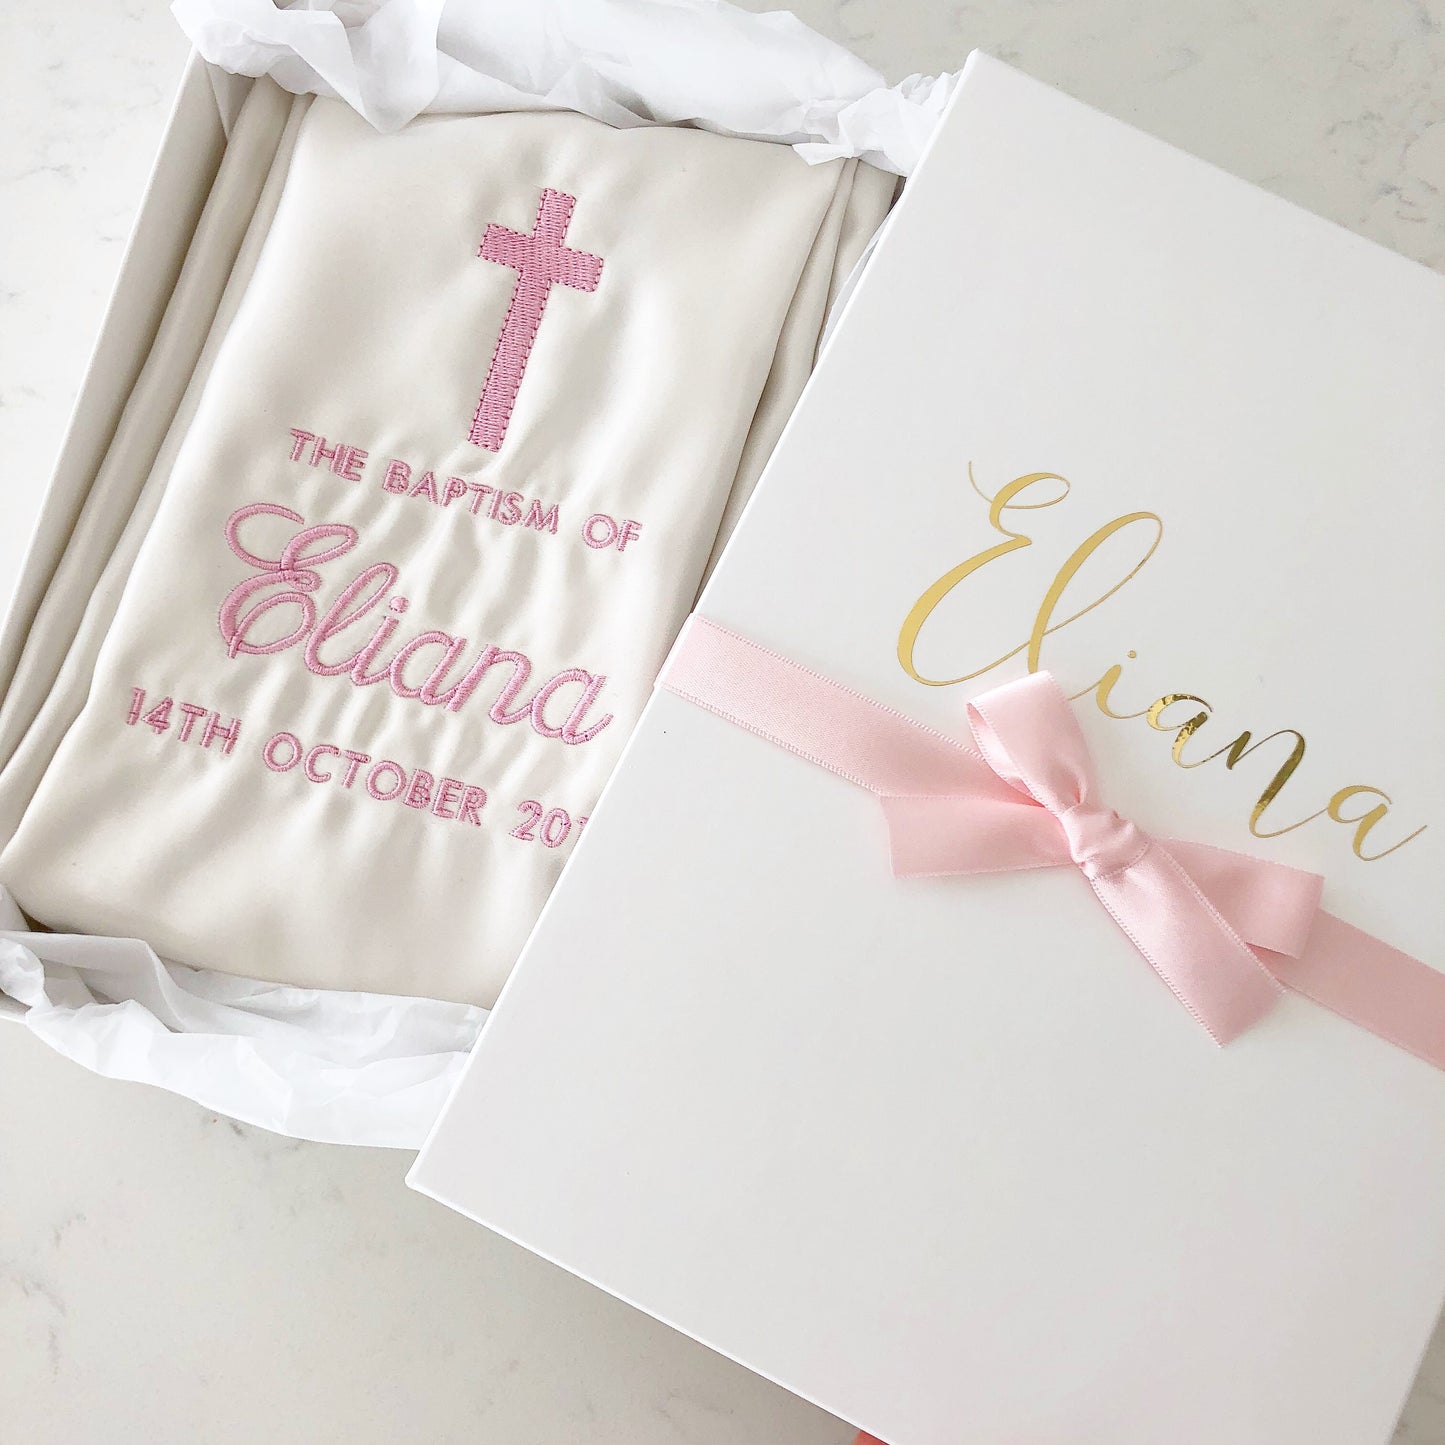 Personalised Stole/Sash for your child's baptism.